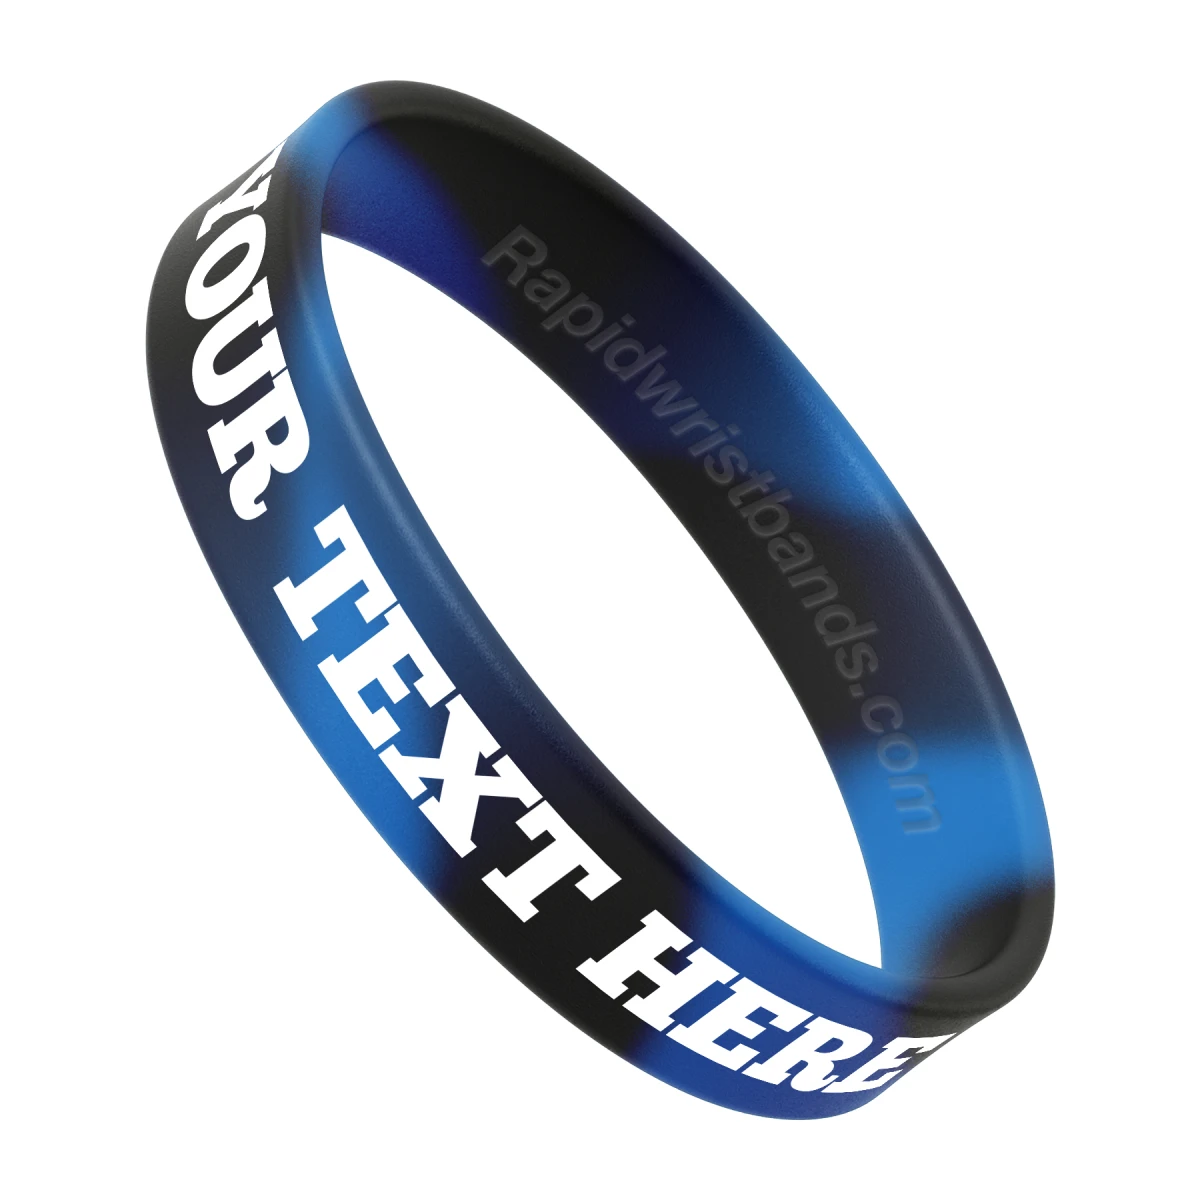 Swirl Black/Blue Wristband With Your Text Here Printed In White